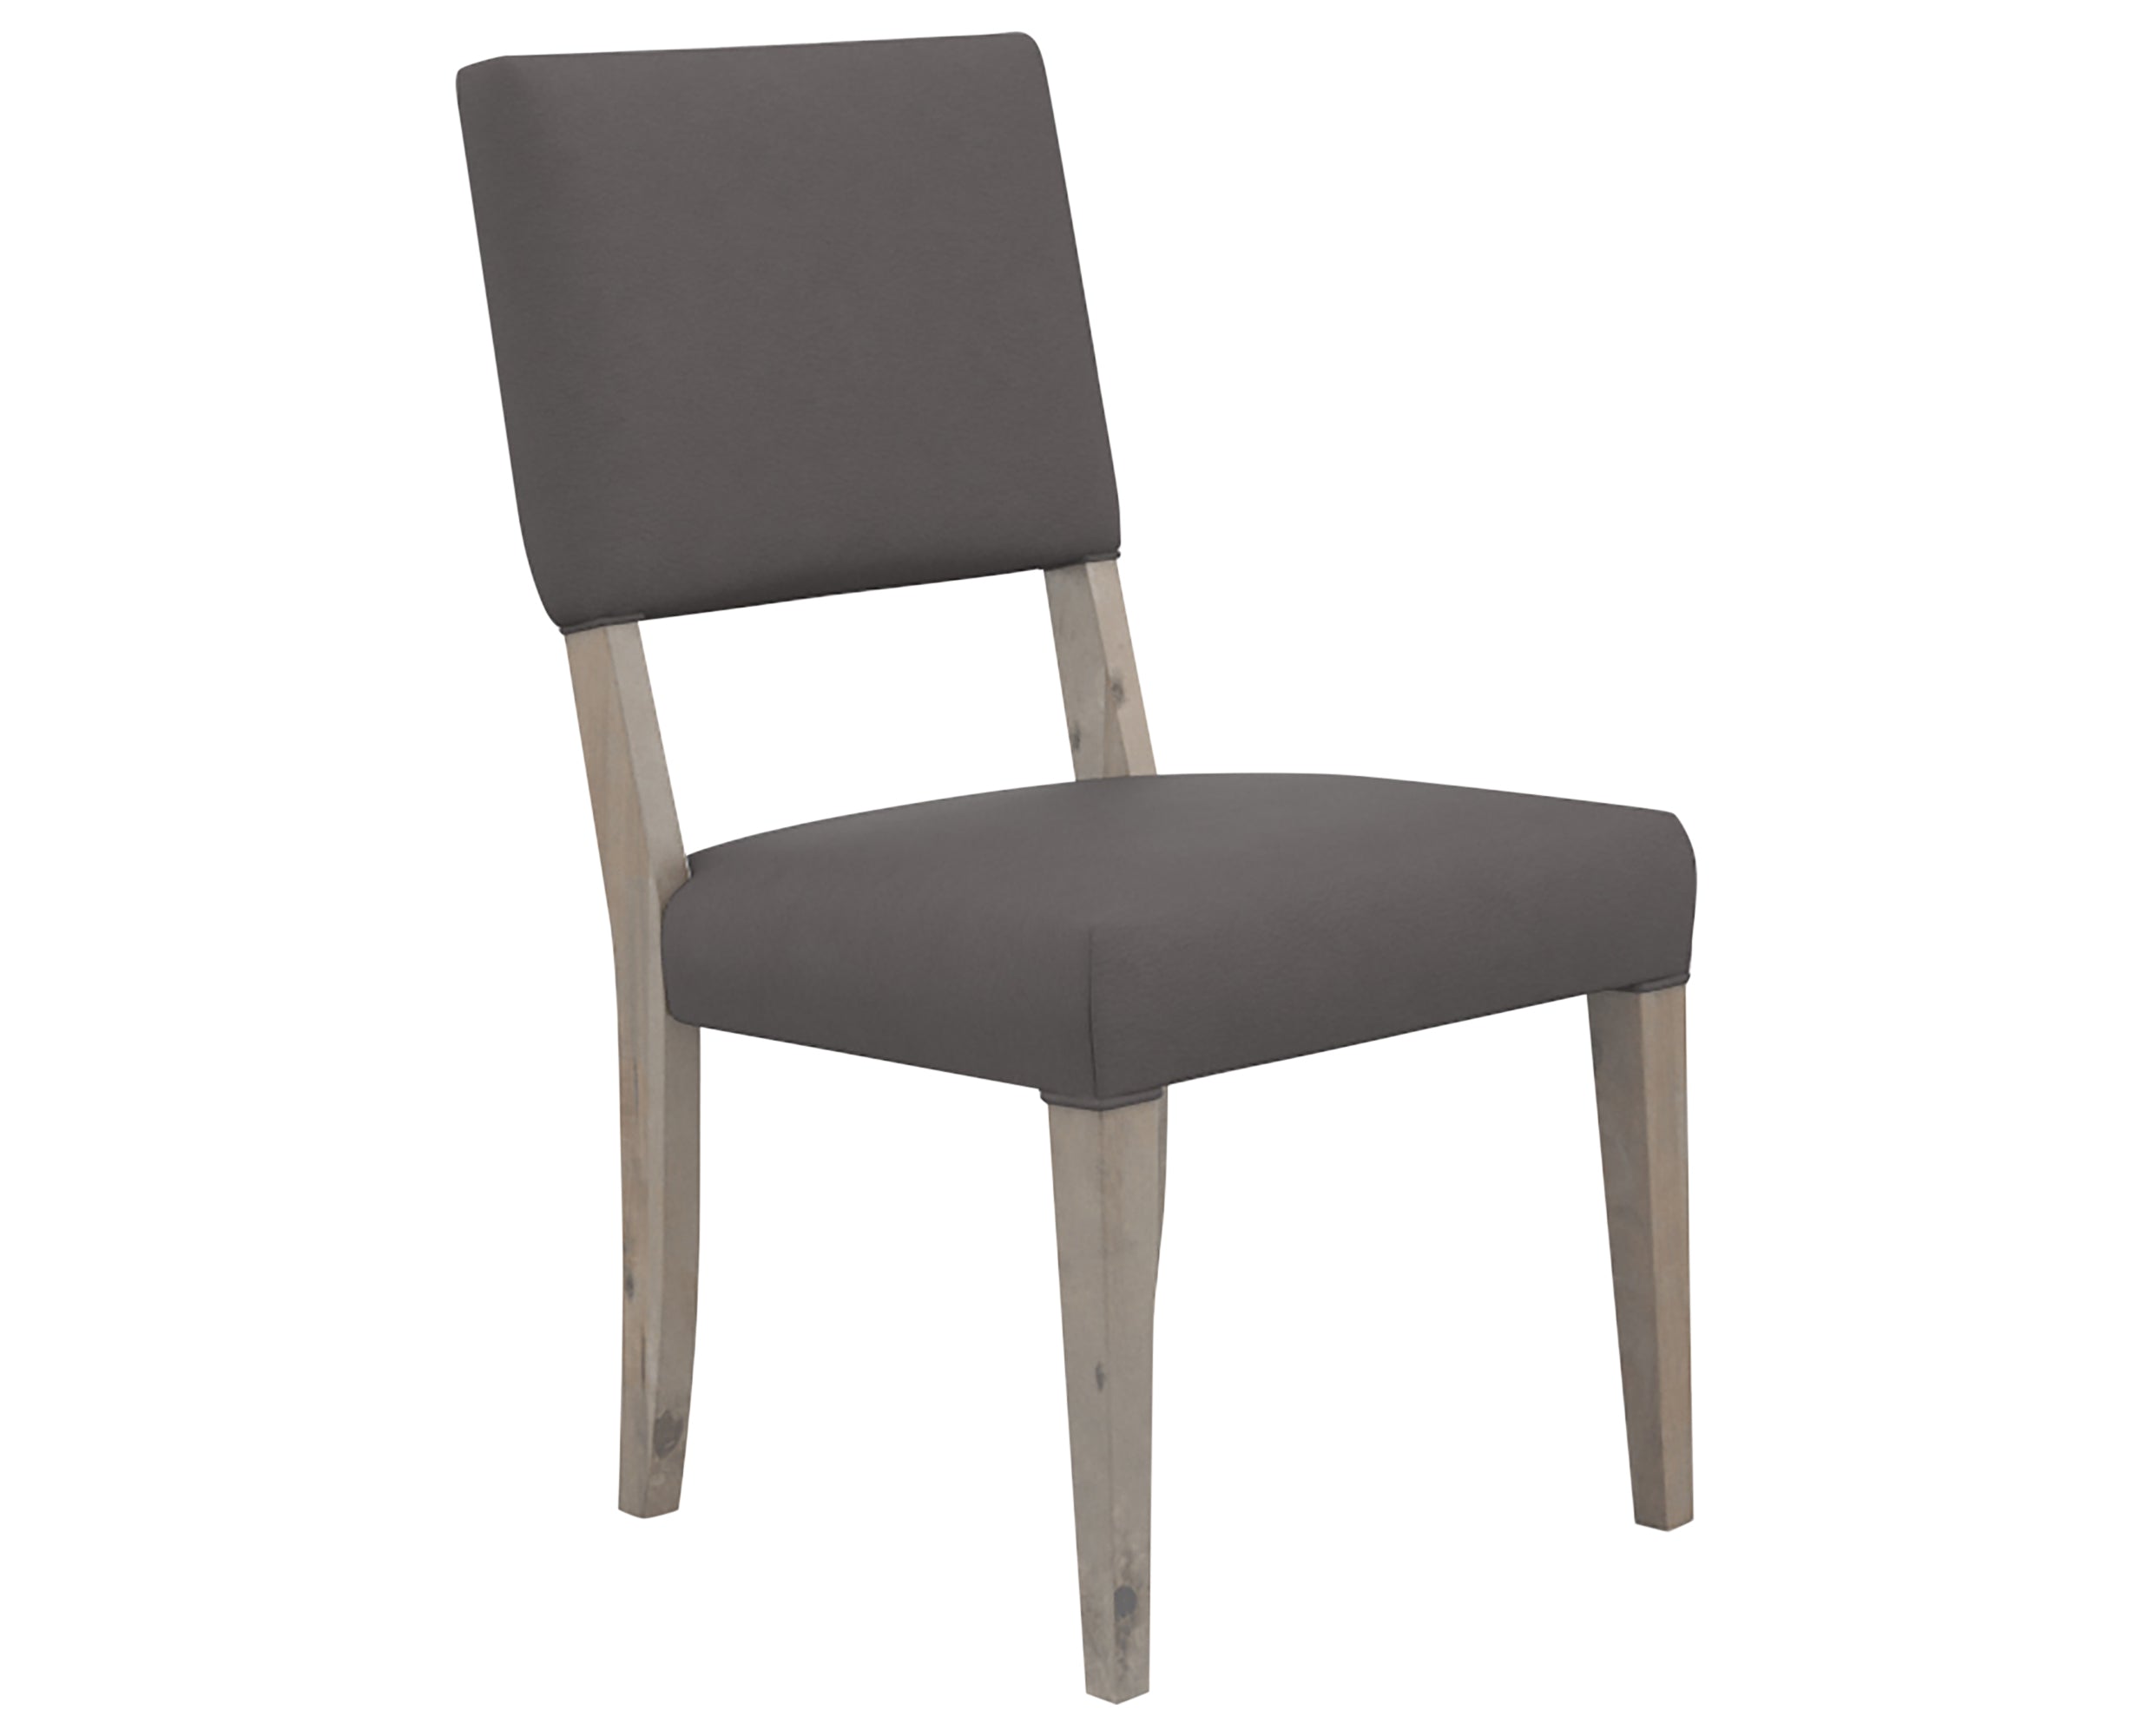 Shadow &amp; Faux Leather XU | Canadel Loft Dining Chair 5051 | Valley Ridge Furniture